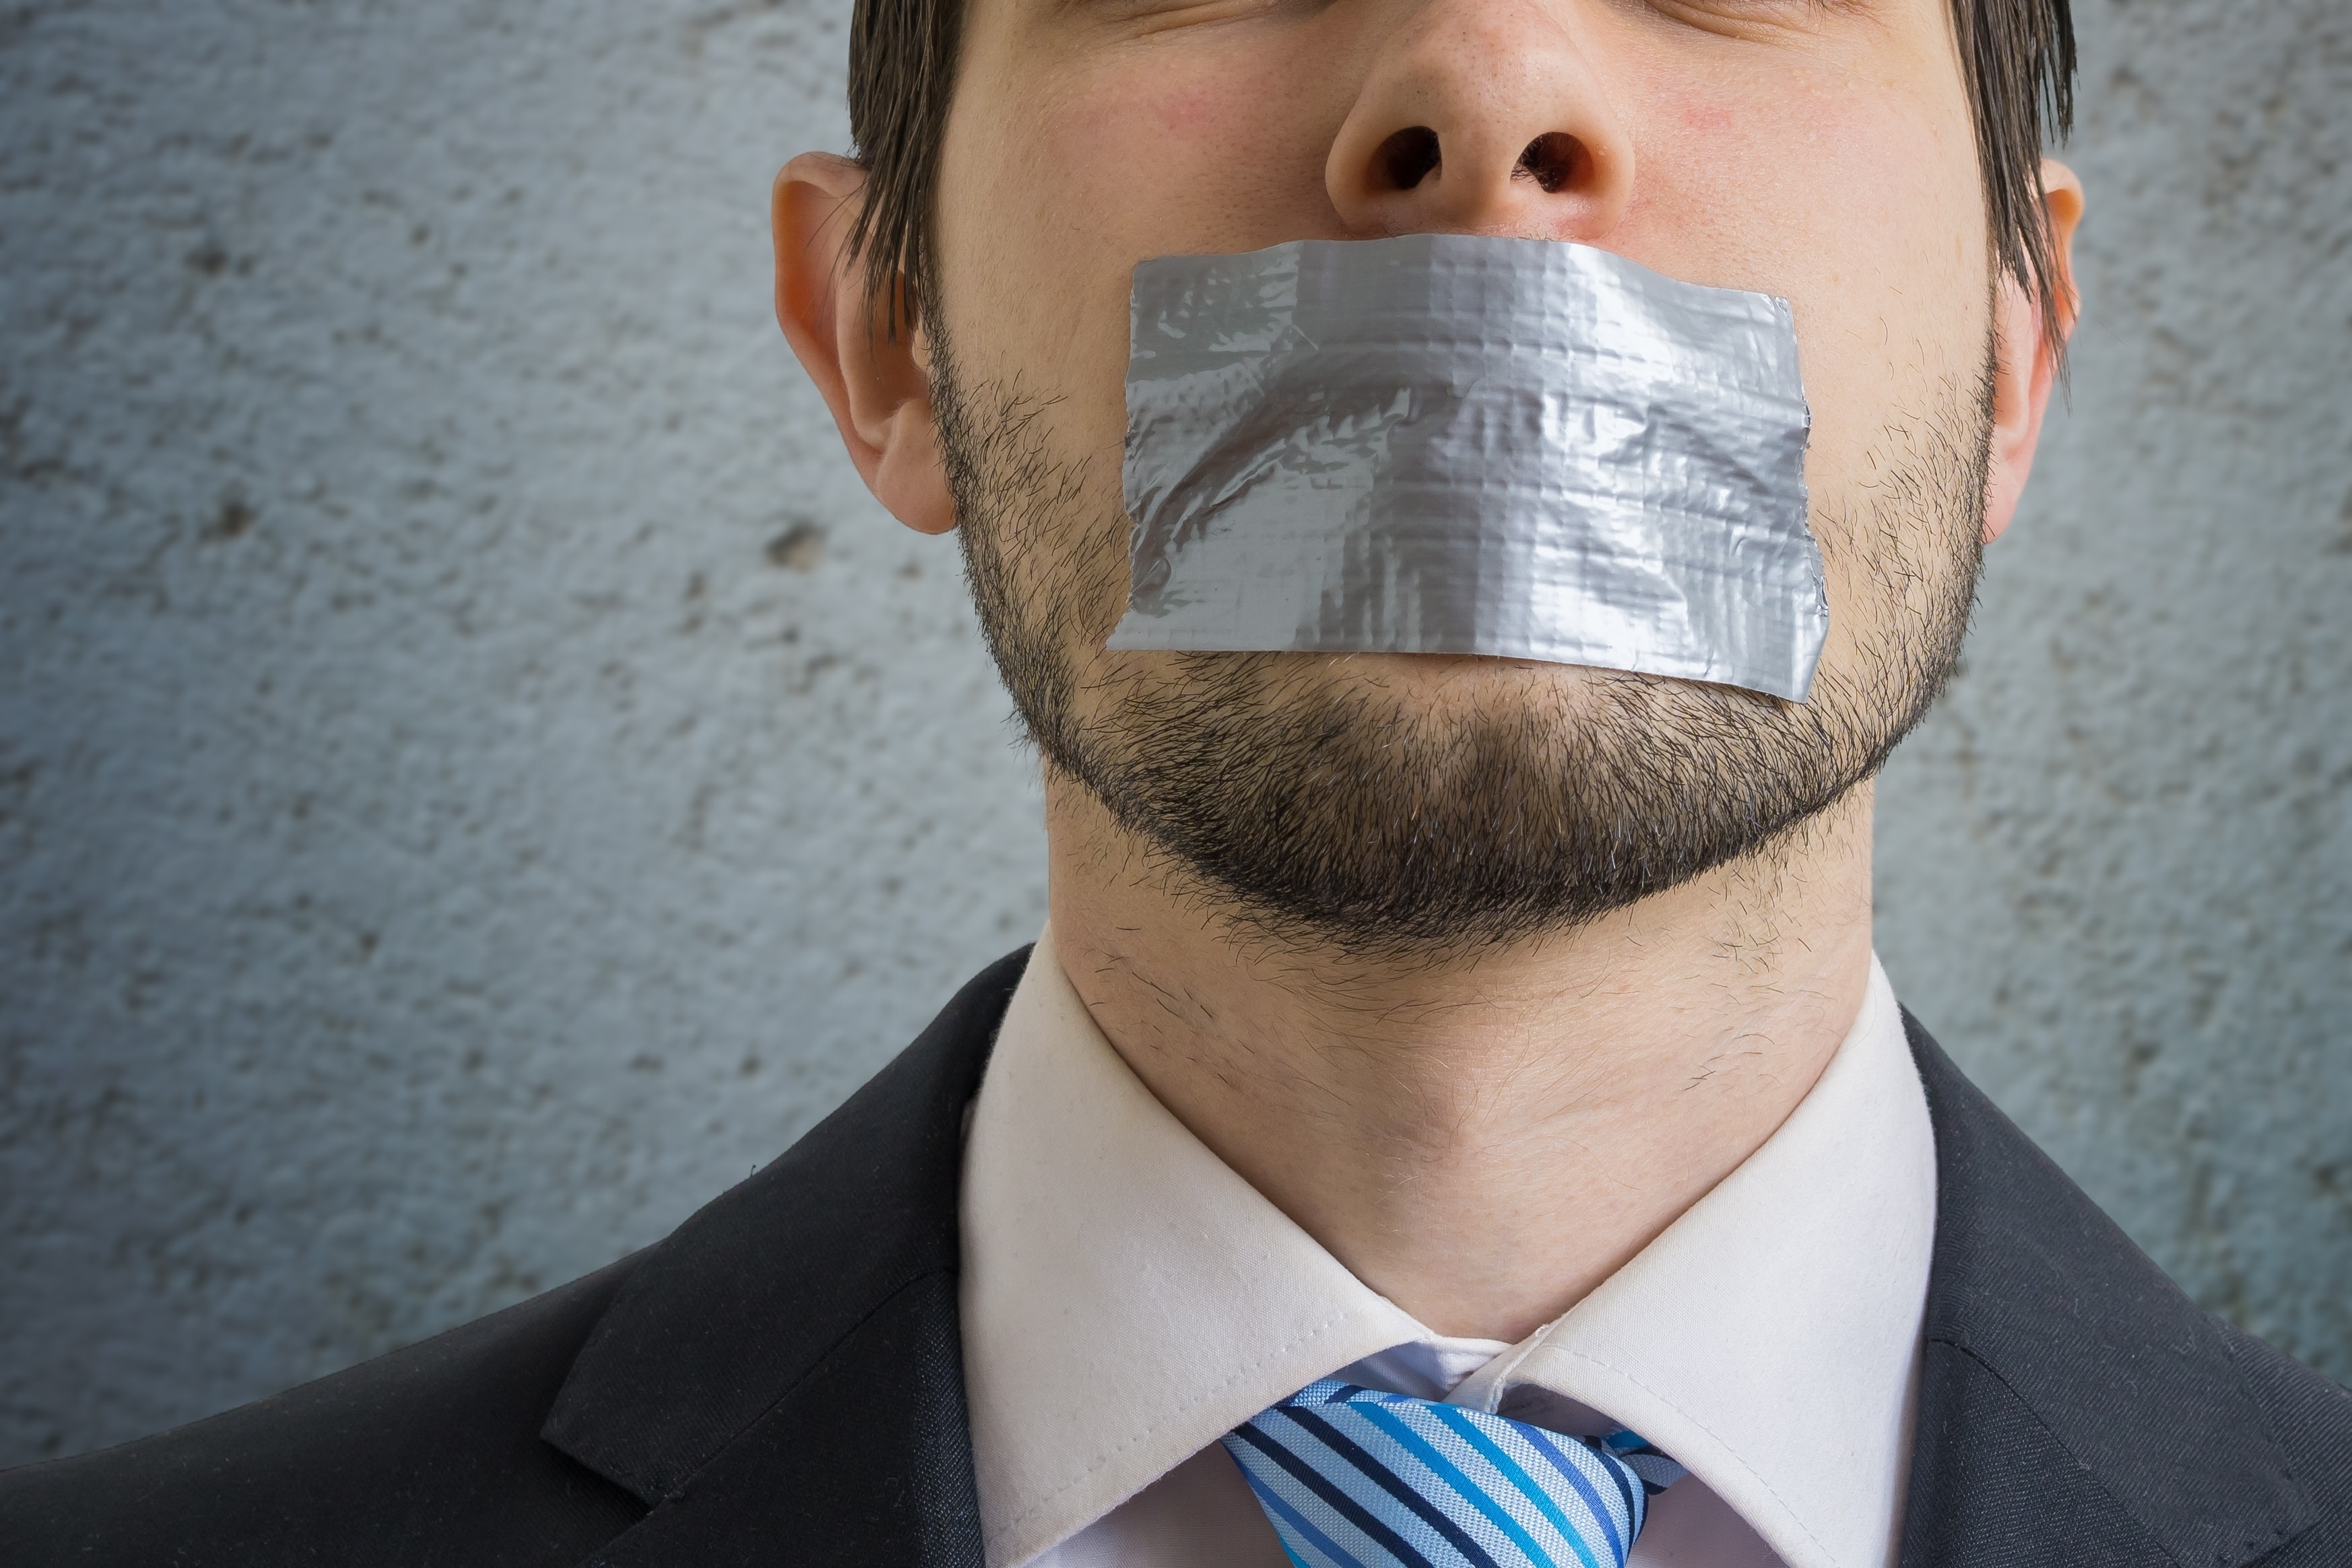 Are Christians Facing Modern-Day Oppression? Censorship, Pinterest and the TRUTH